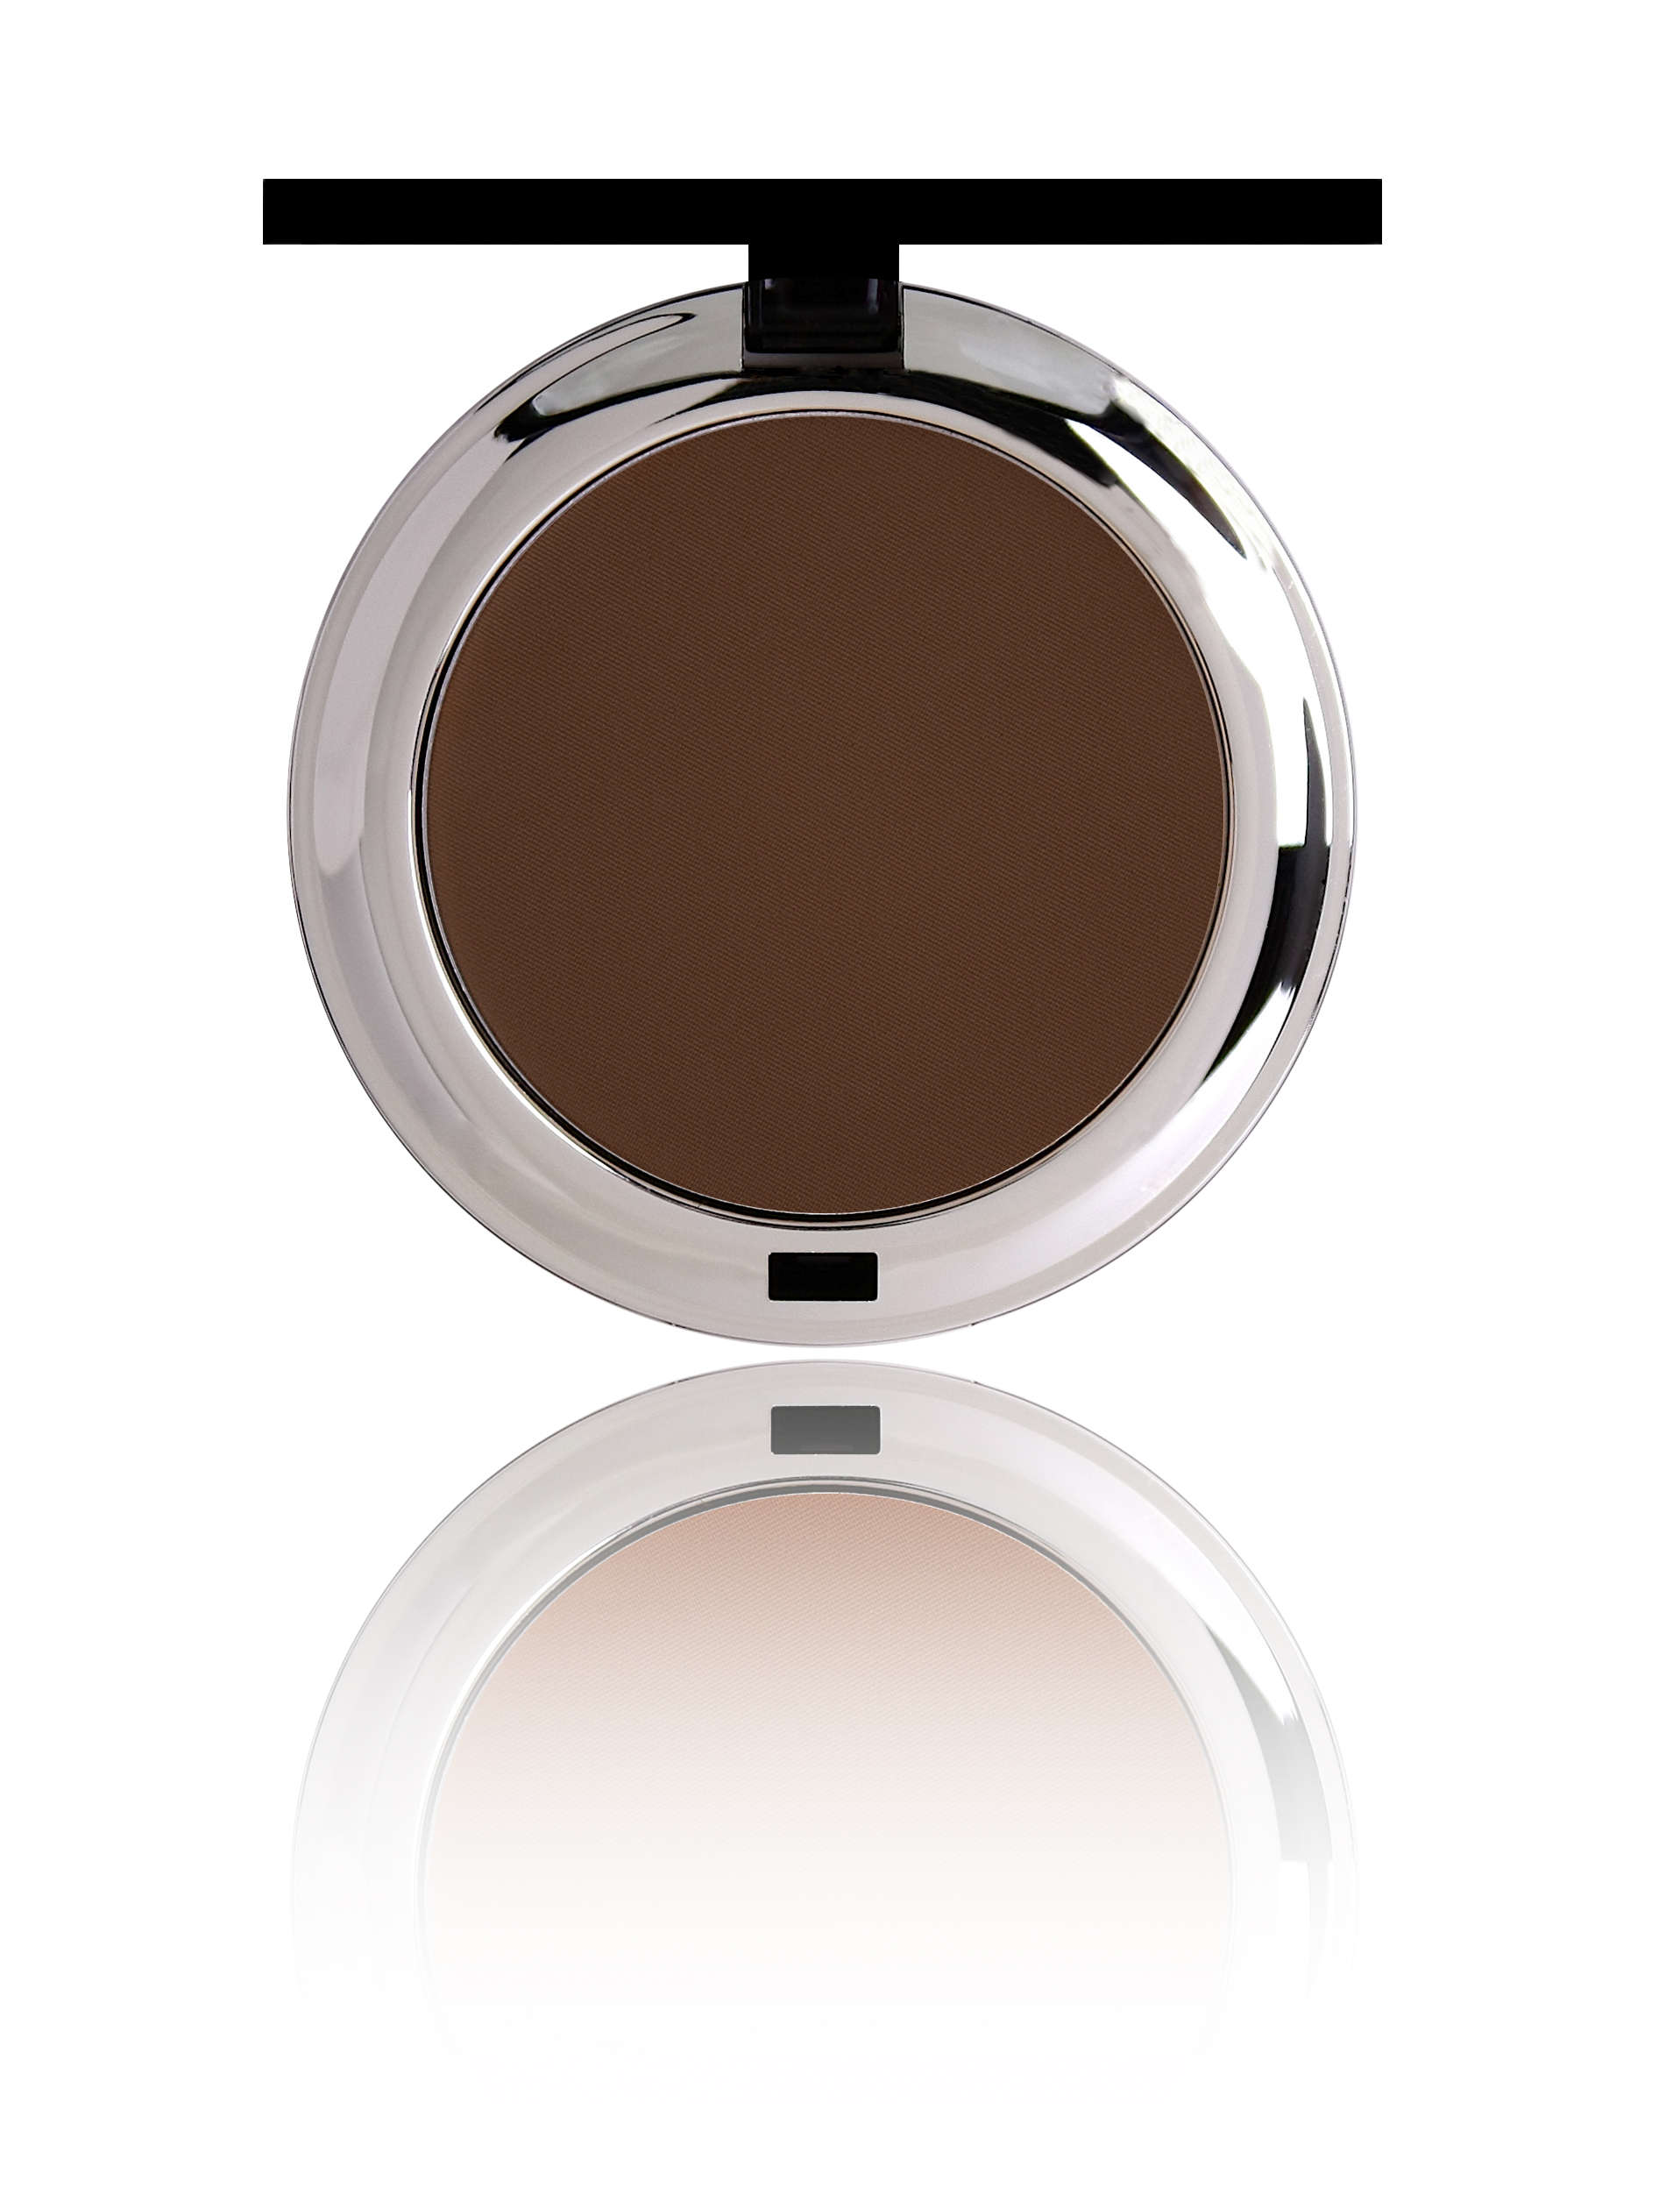 Bellapierre Mineral compact foundation Cacao